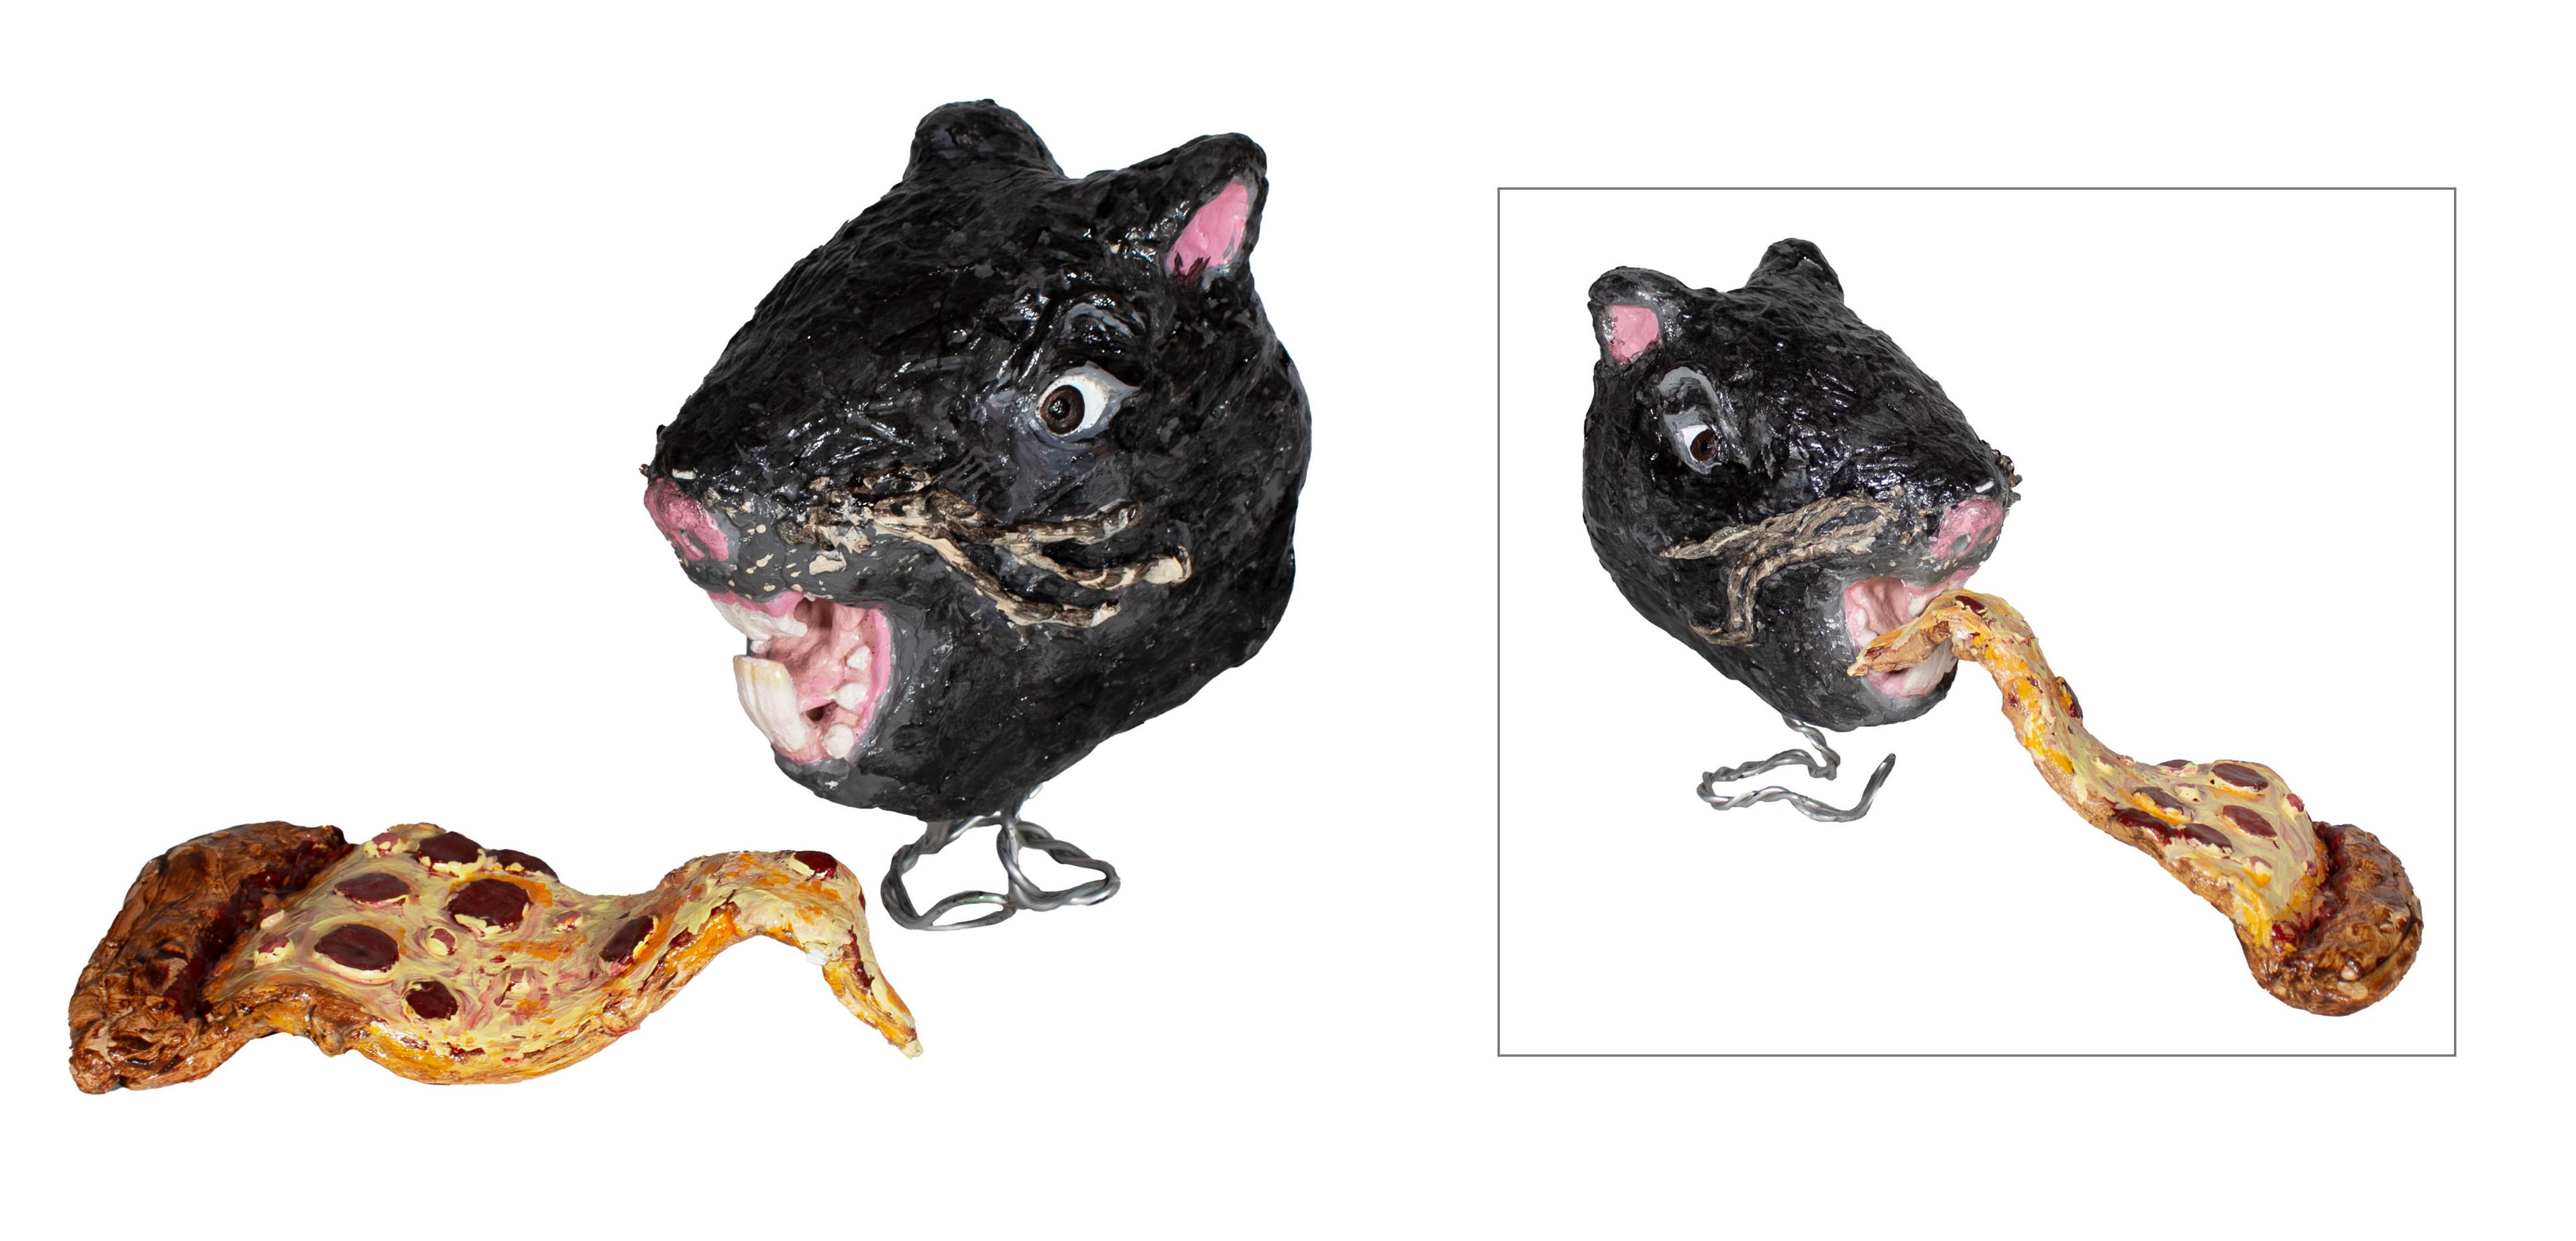 Papier mâché–and–Model Magic sculpture of a black rat's head with opened mouth shown to the right and rear of a curled slice of pepperoni pizza. The rat's head and pizza are shown again at a different angle in another photo on the right, with the tip of the pizza slice entering the rat's mouth.